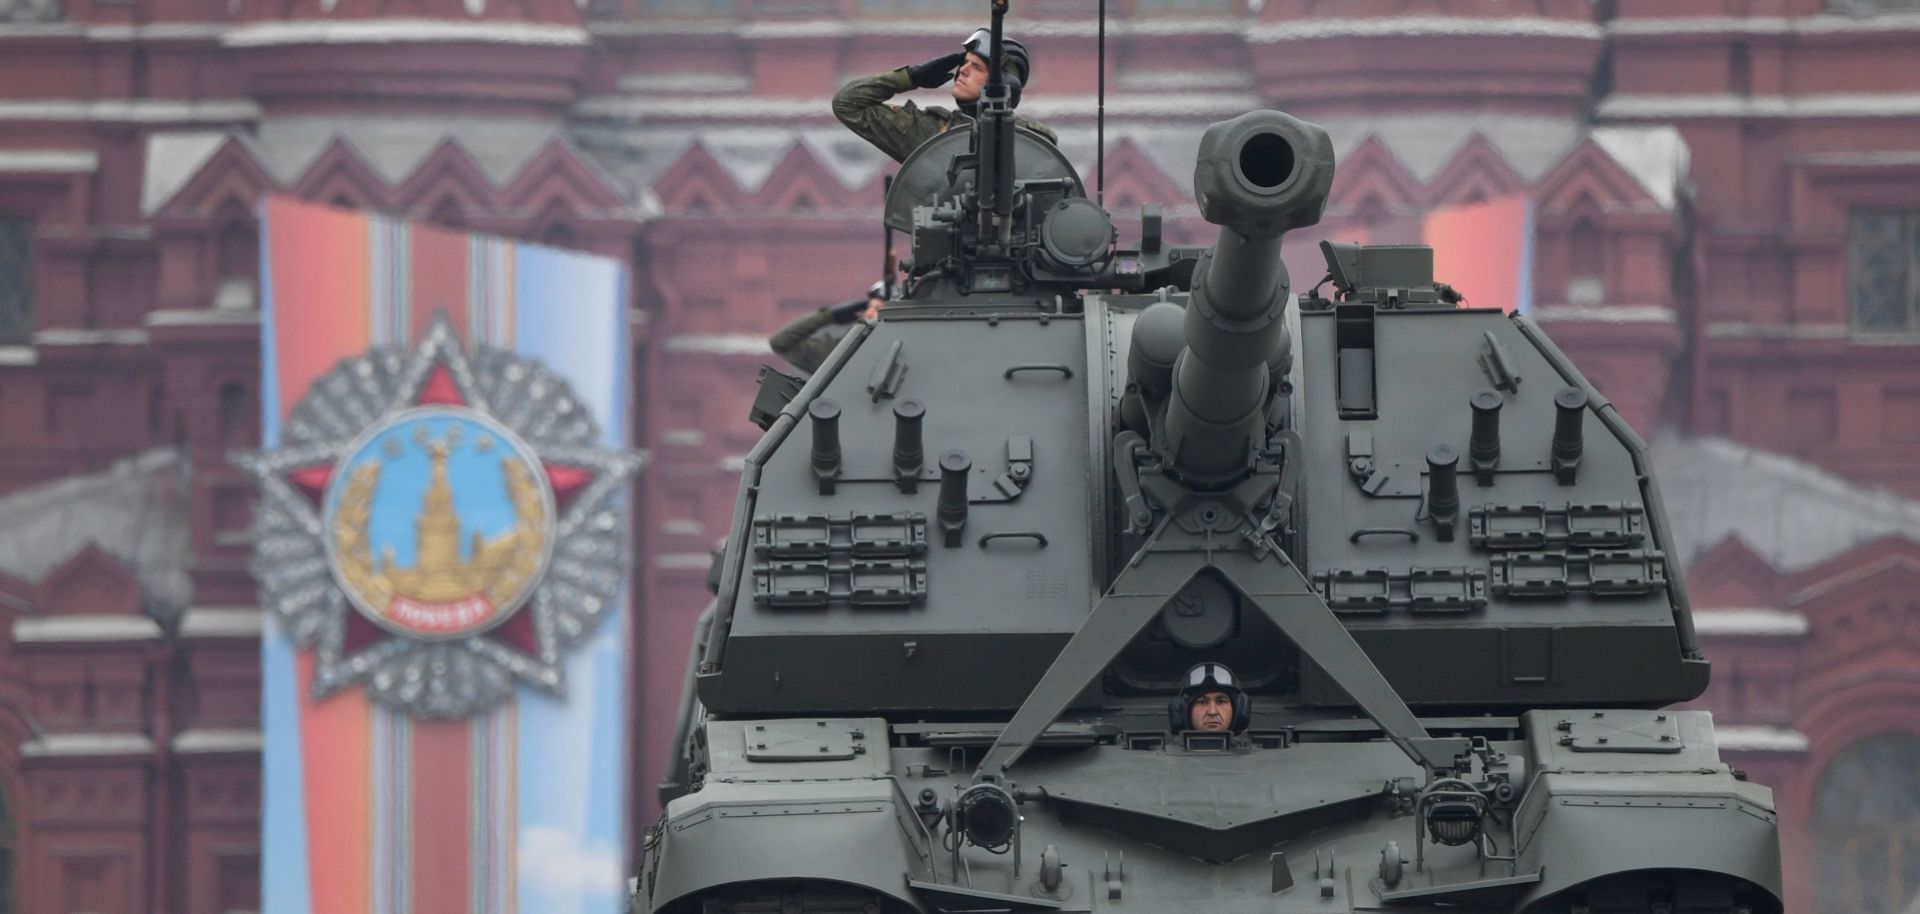 This photo shows a Msta-S self-propelled howitzer rolling through Red Square during the Victory Day parade in Moscow on May 9, 2019.